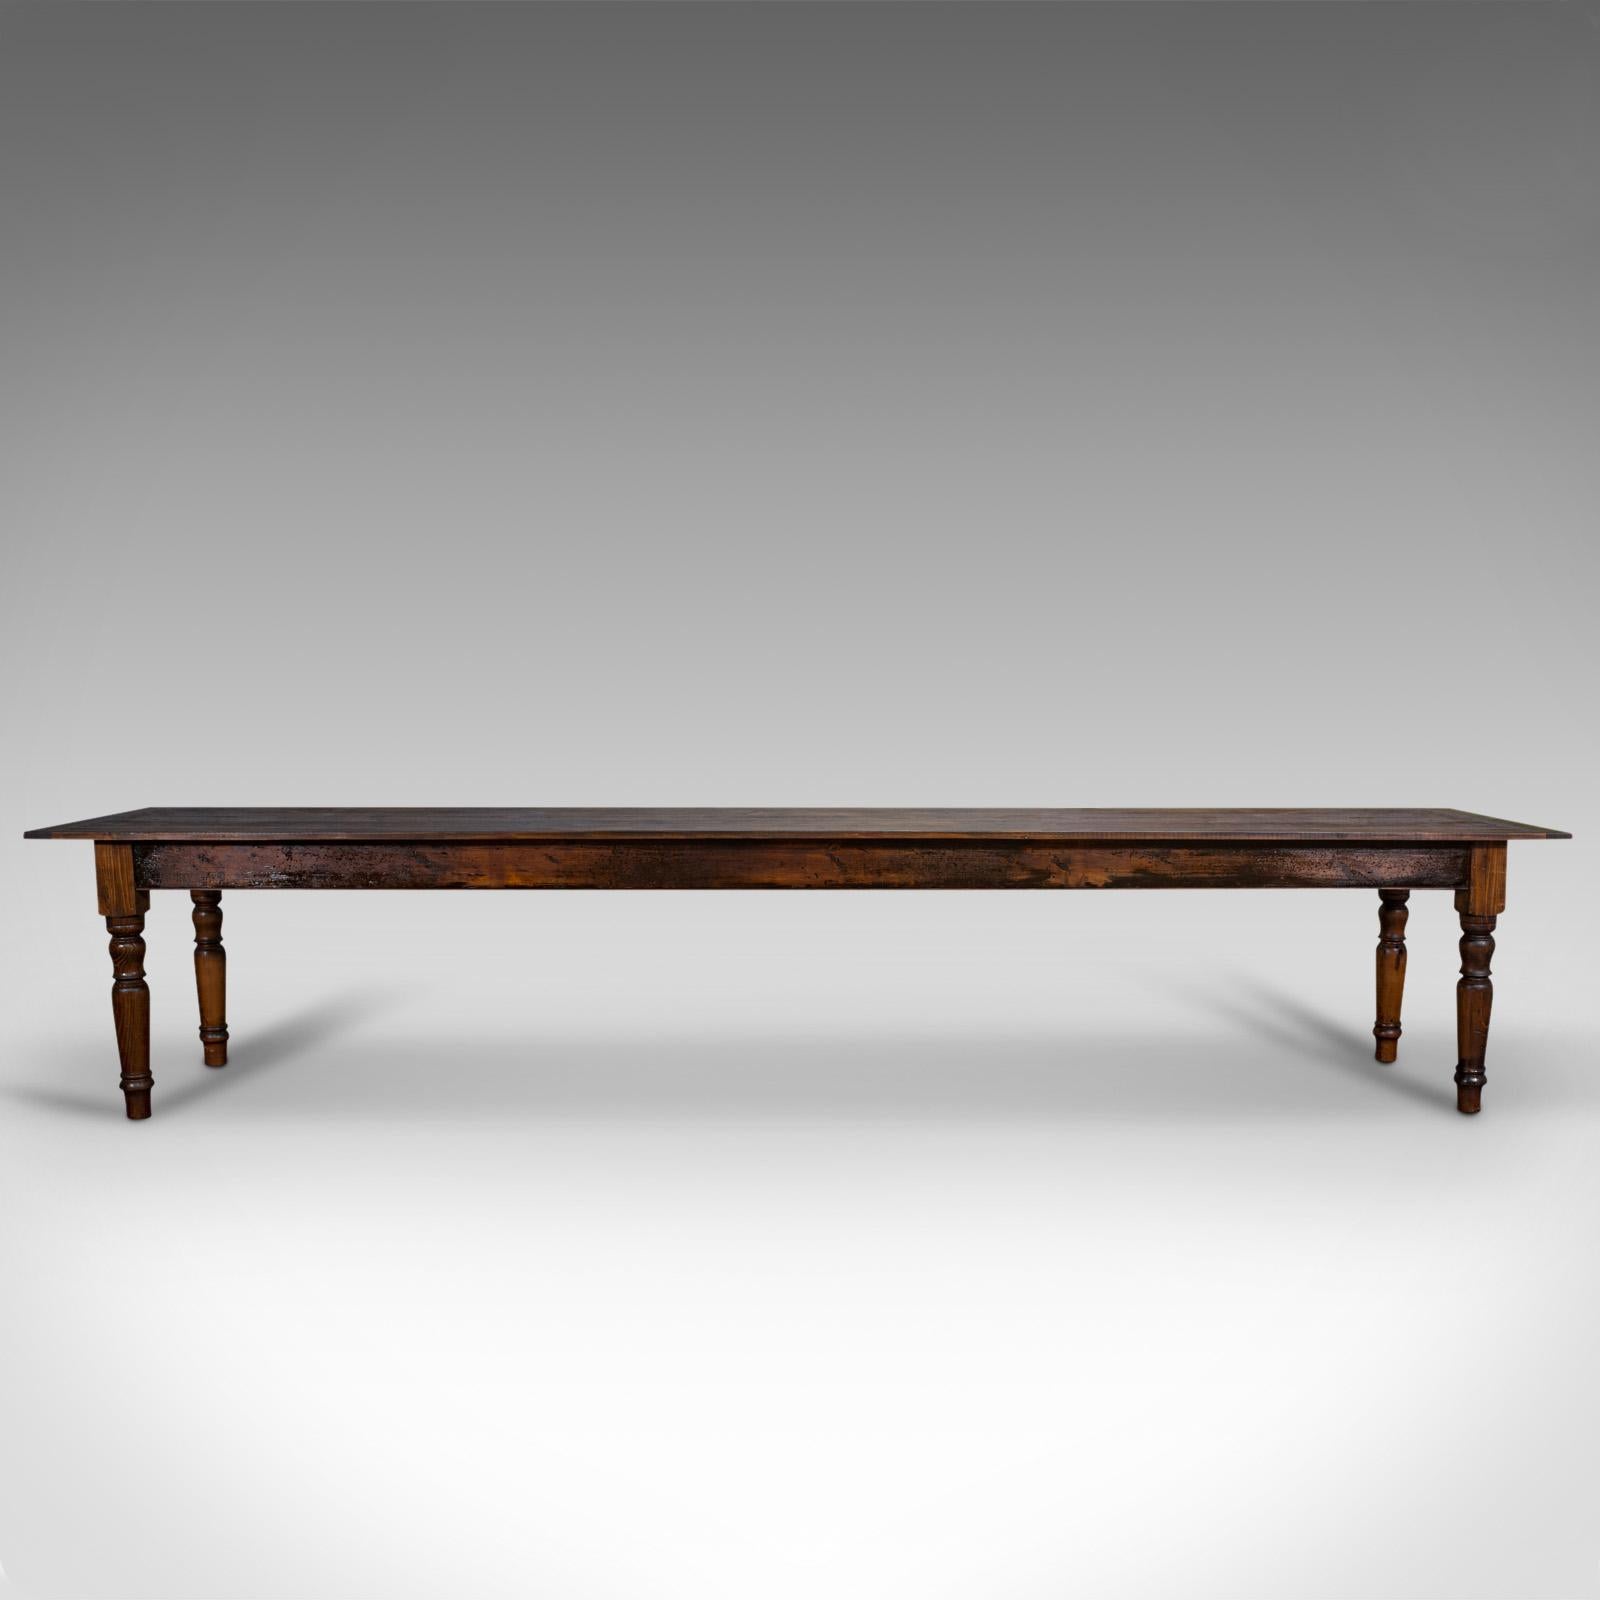 This is a very large antique dining table. An English, pine country house table for 12-16 people, dating to the Victorian period and later, circa 1900.

Captivating proportion at 4 metres (13.13') long
Displays a desirable aged patina and